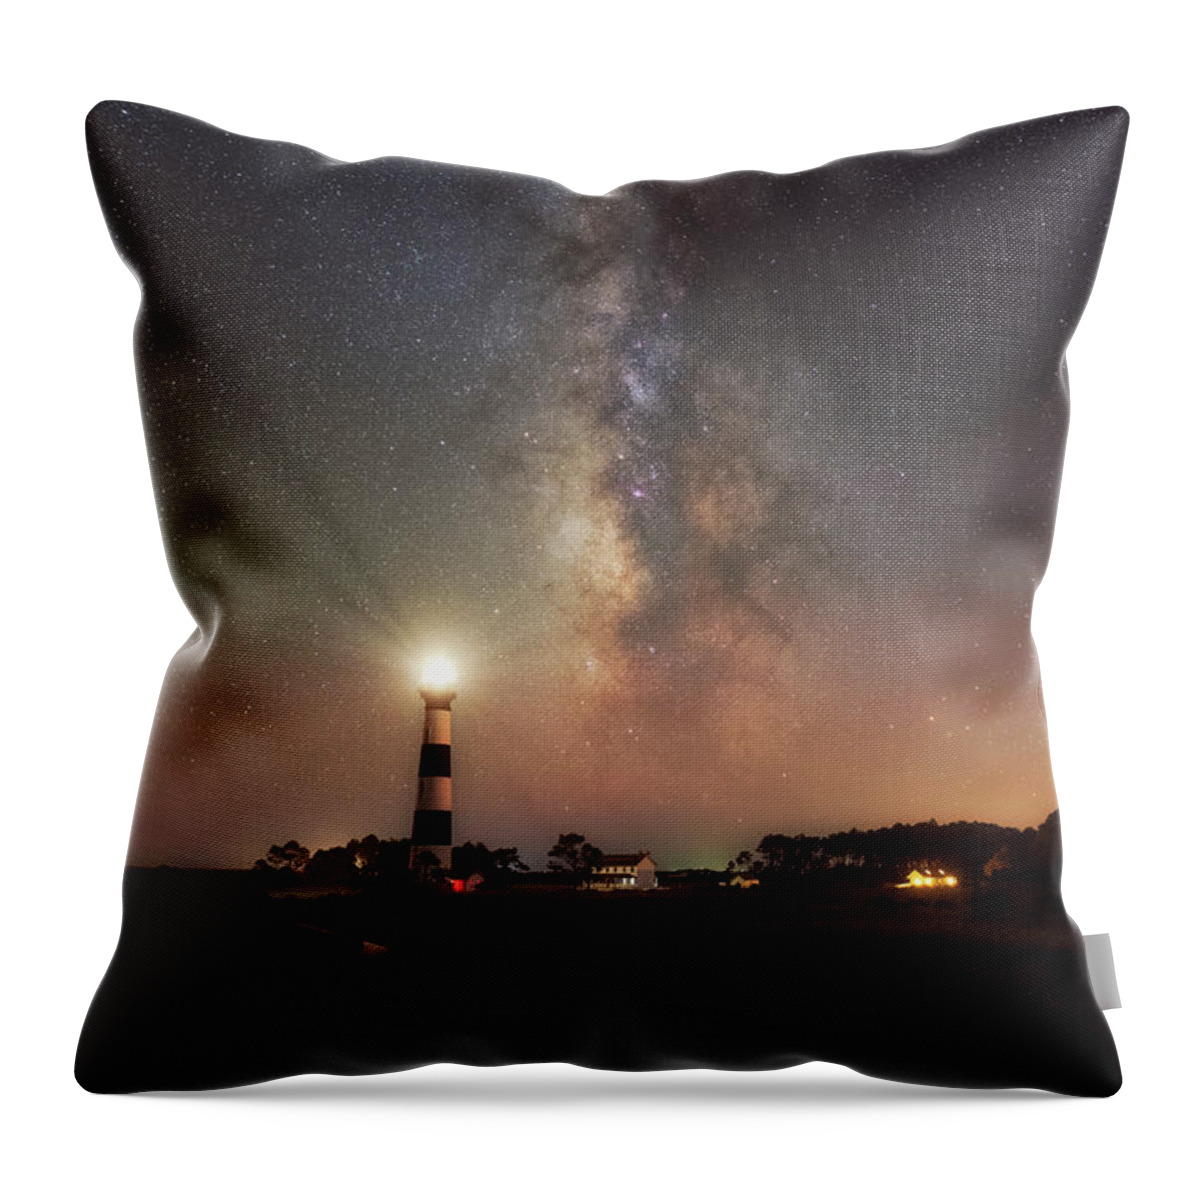 Guidance Throw Pillow featuring the photograph Guidance by Russell Pugh